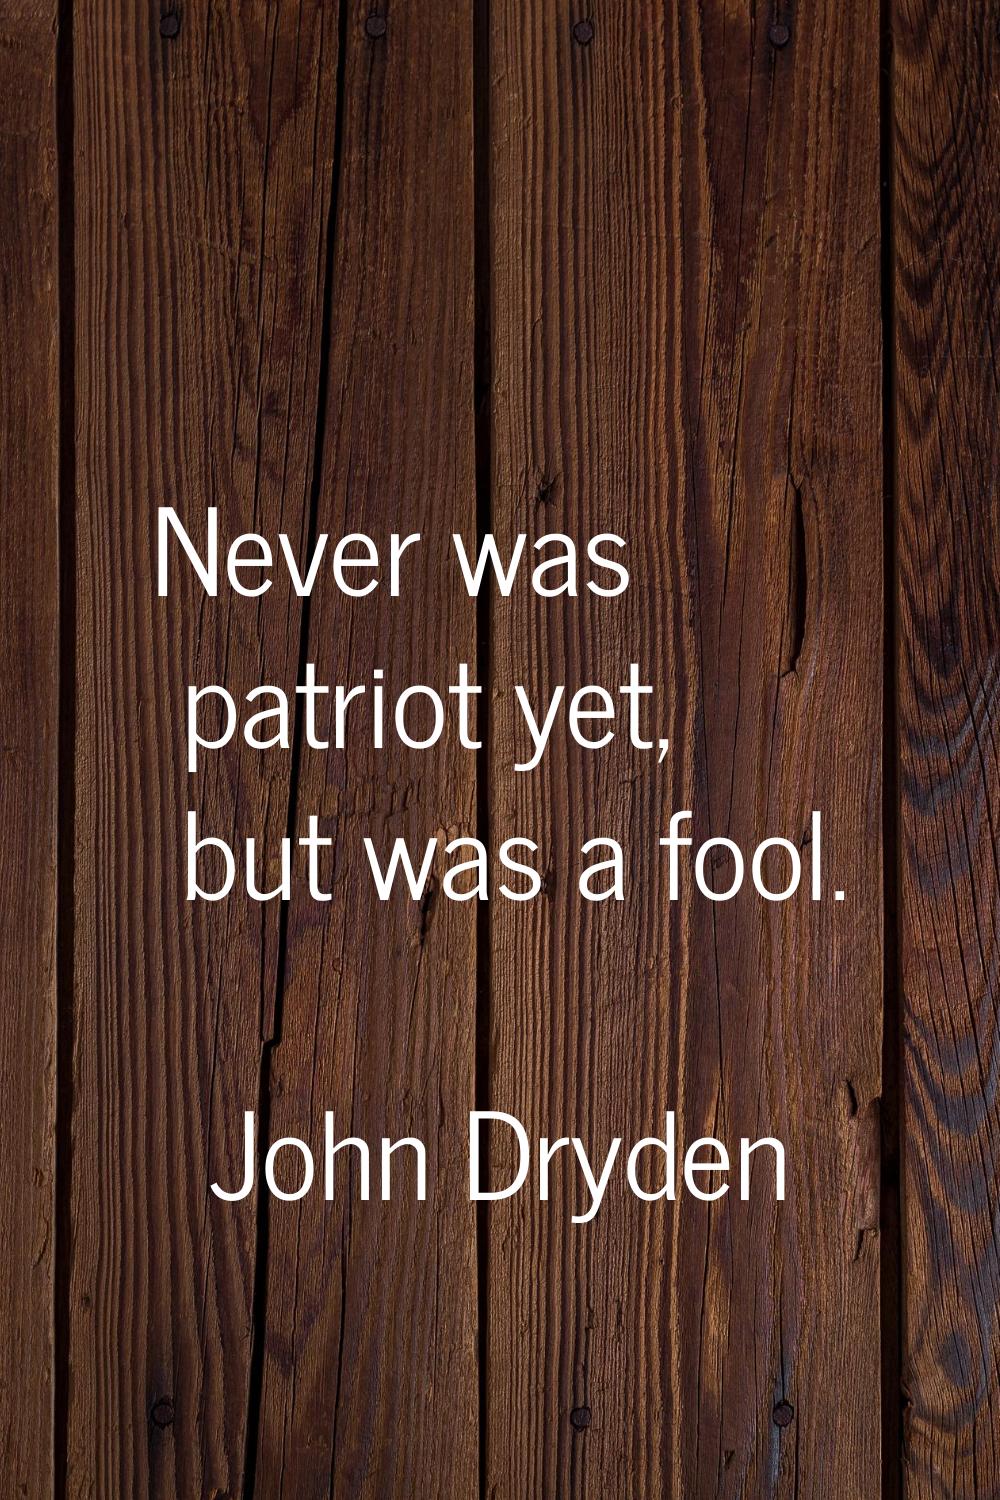 Never was patriot yet, but was a fool.